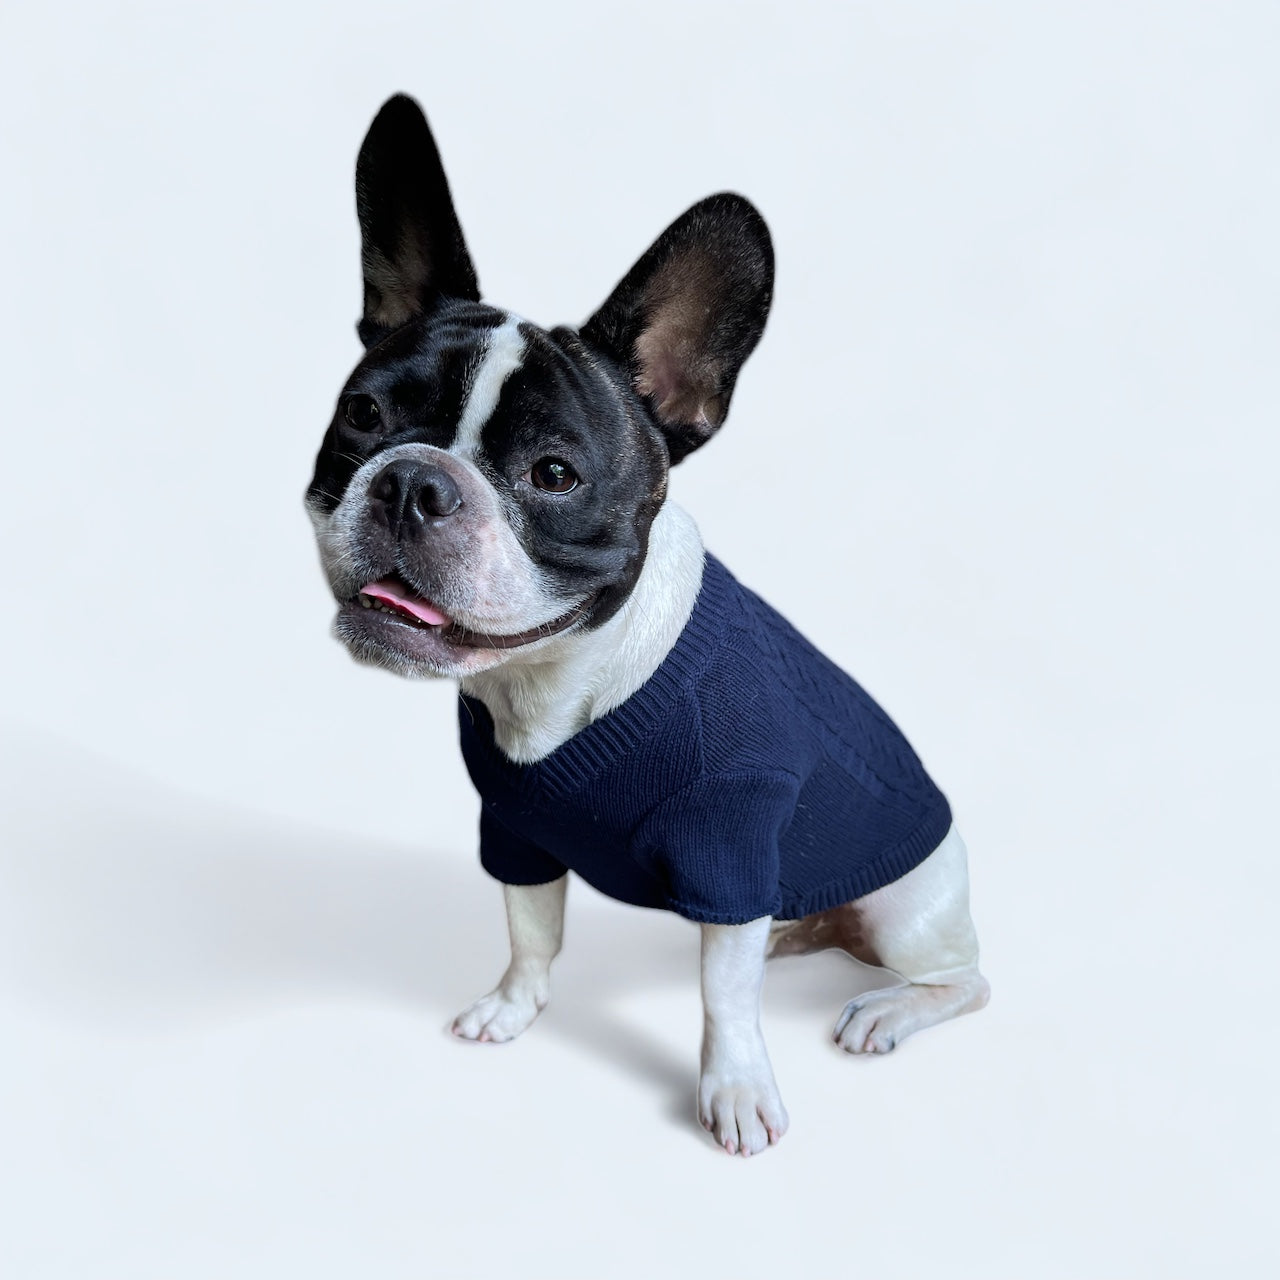 Doggy Jumper - Blue